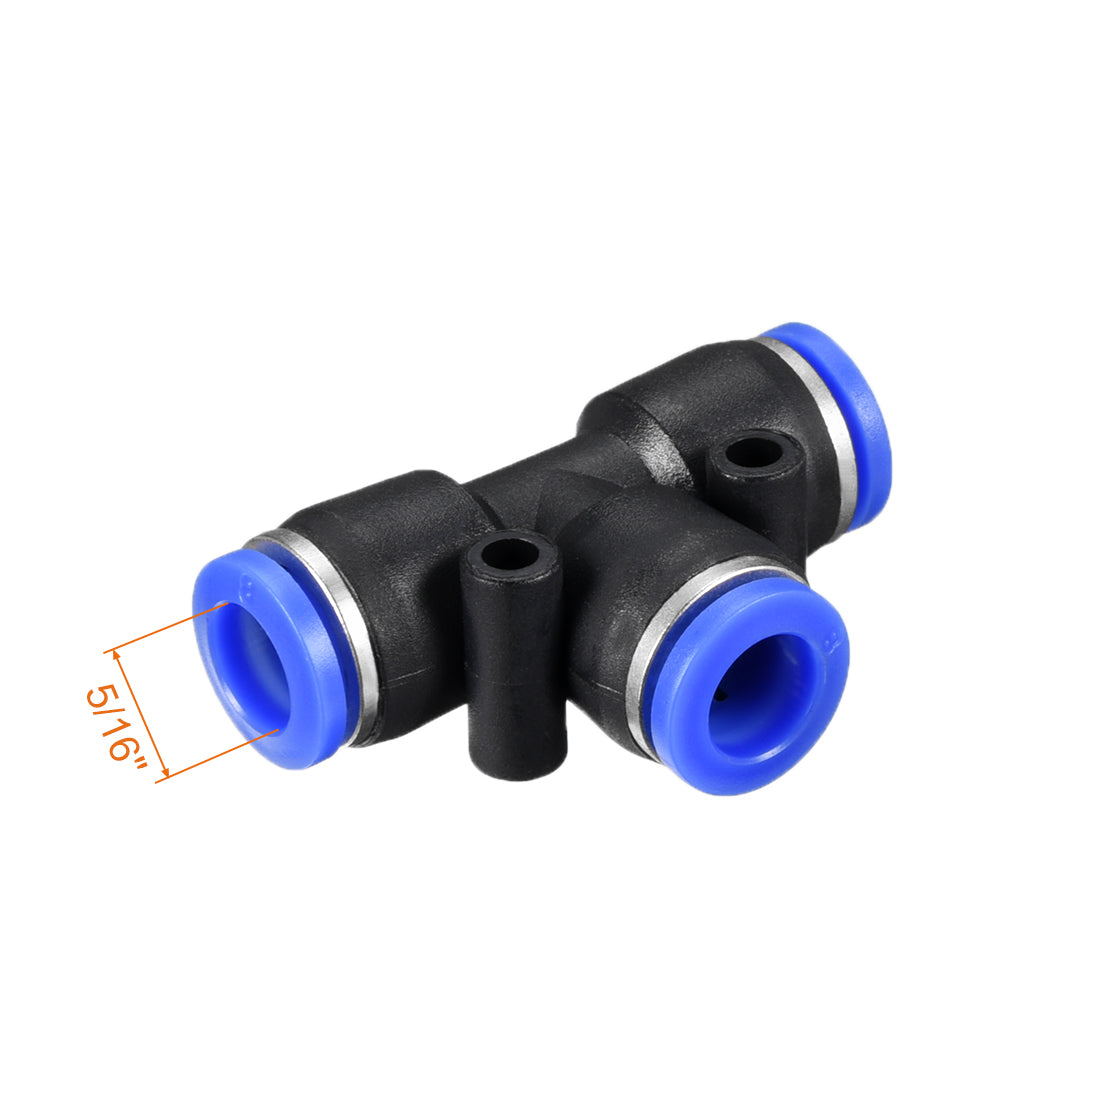 uxcell Uxcell 8pcs Push To Connect Fittings T Type Tube Connect 8mm or 5/16" od Push Fit Fittings Tube Fittings Push Lock Blue (8mm T tee)